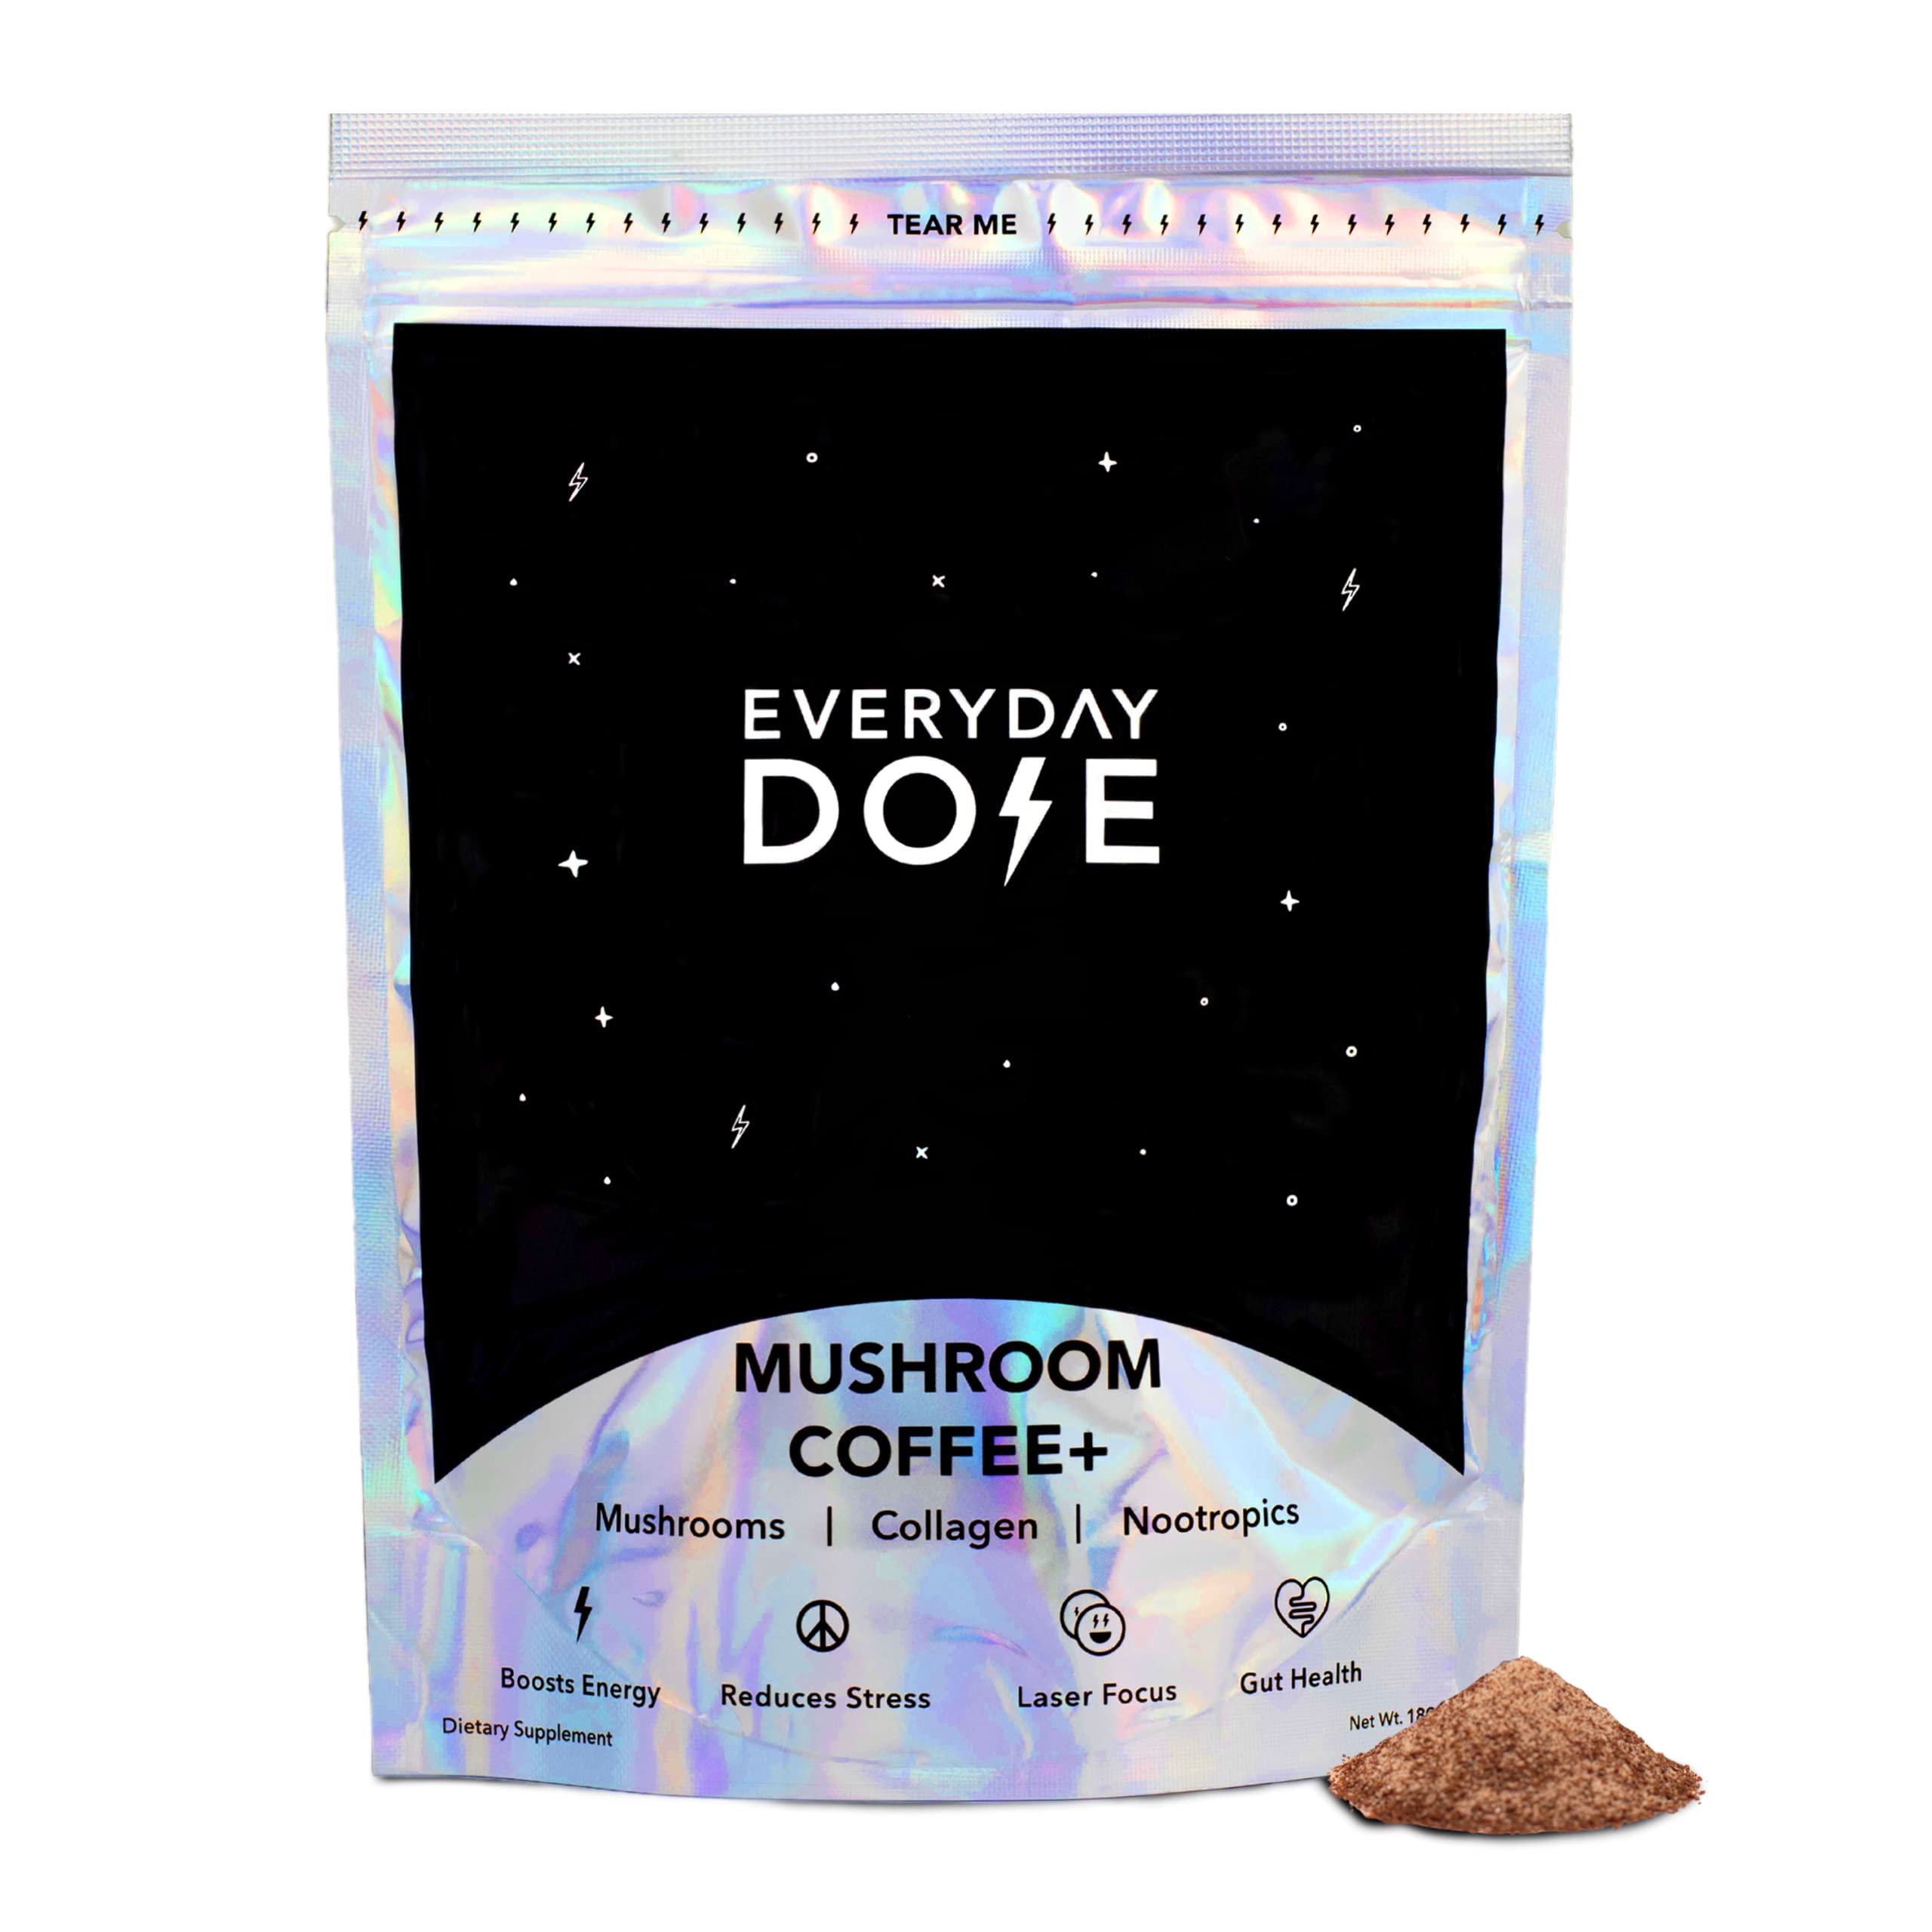 The Mushroom Latte by Everyday Dose | Premium Coffee Extract with Grass-Fed Collagen, Chaga, Lions Mane & L-Theanine for better Focus, Energy, Digestion and Immunity | 30 Servings Of Mushroom Coffee